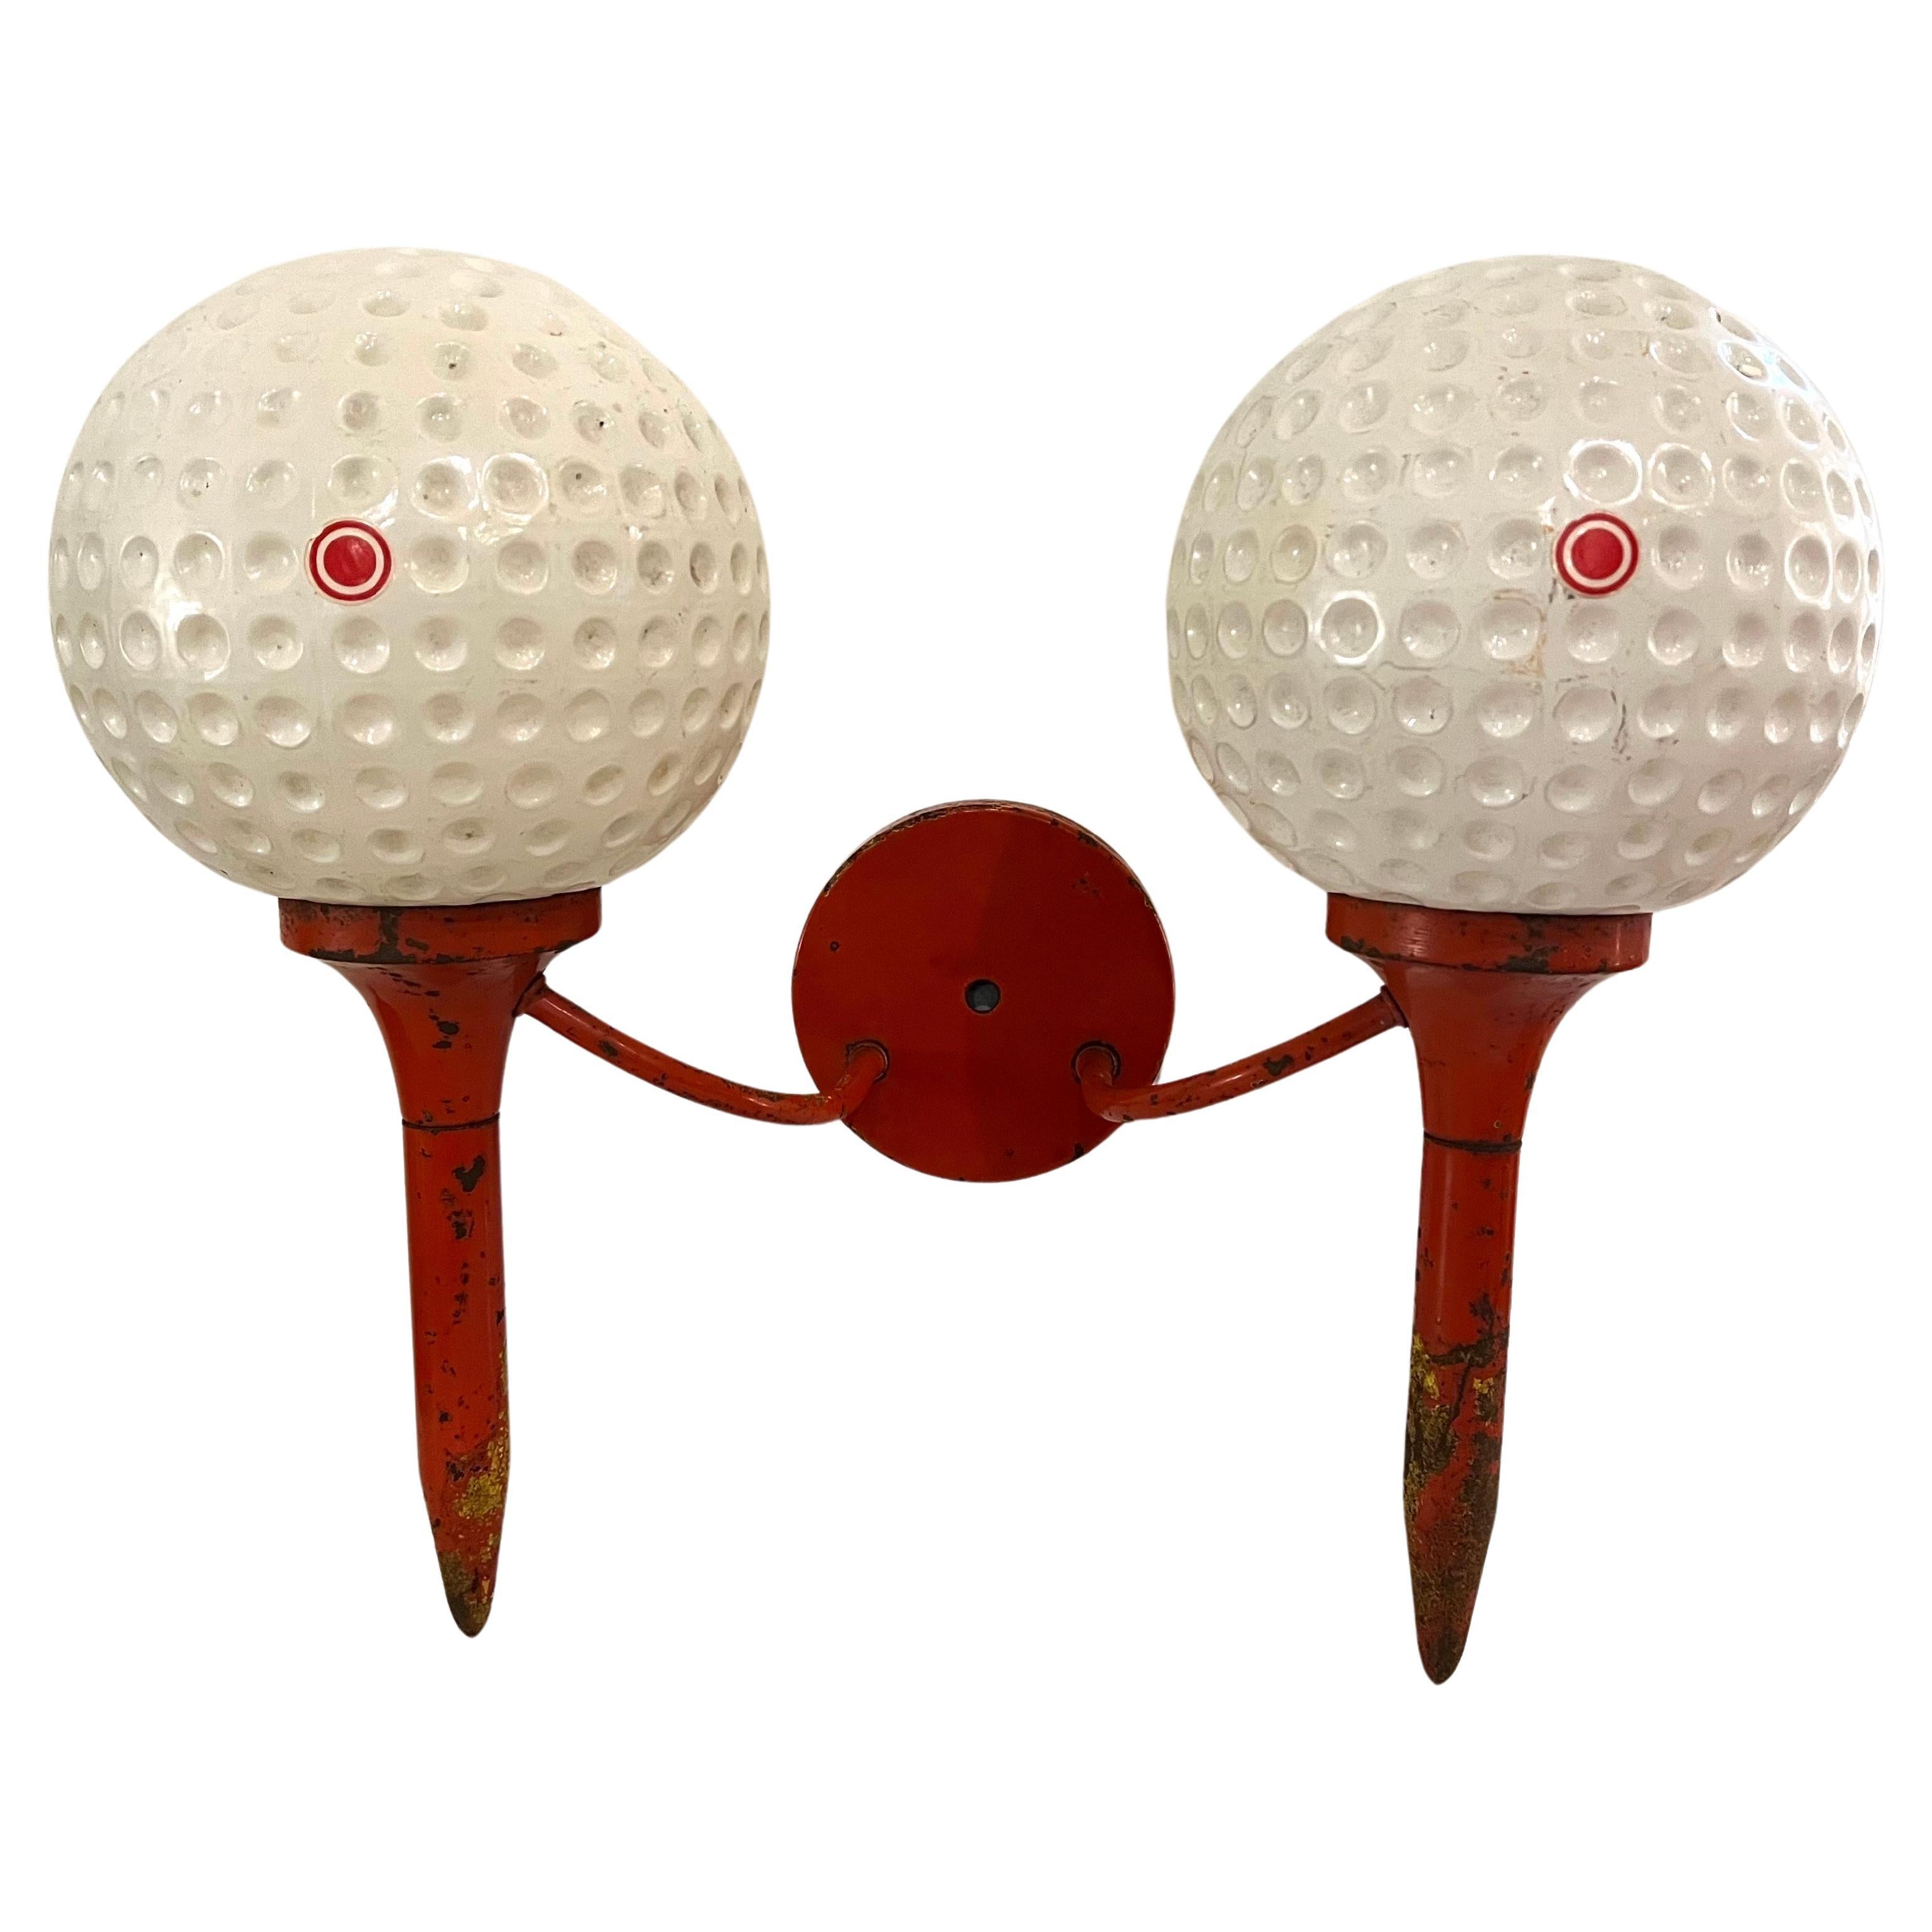 Whimsical Rare Glass Golf Balls On Patinated Tees Wall Sconce Pop Art For Sale